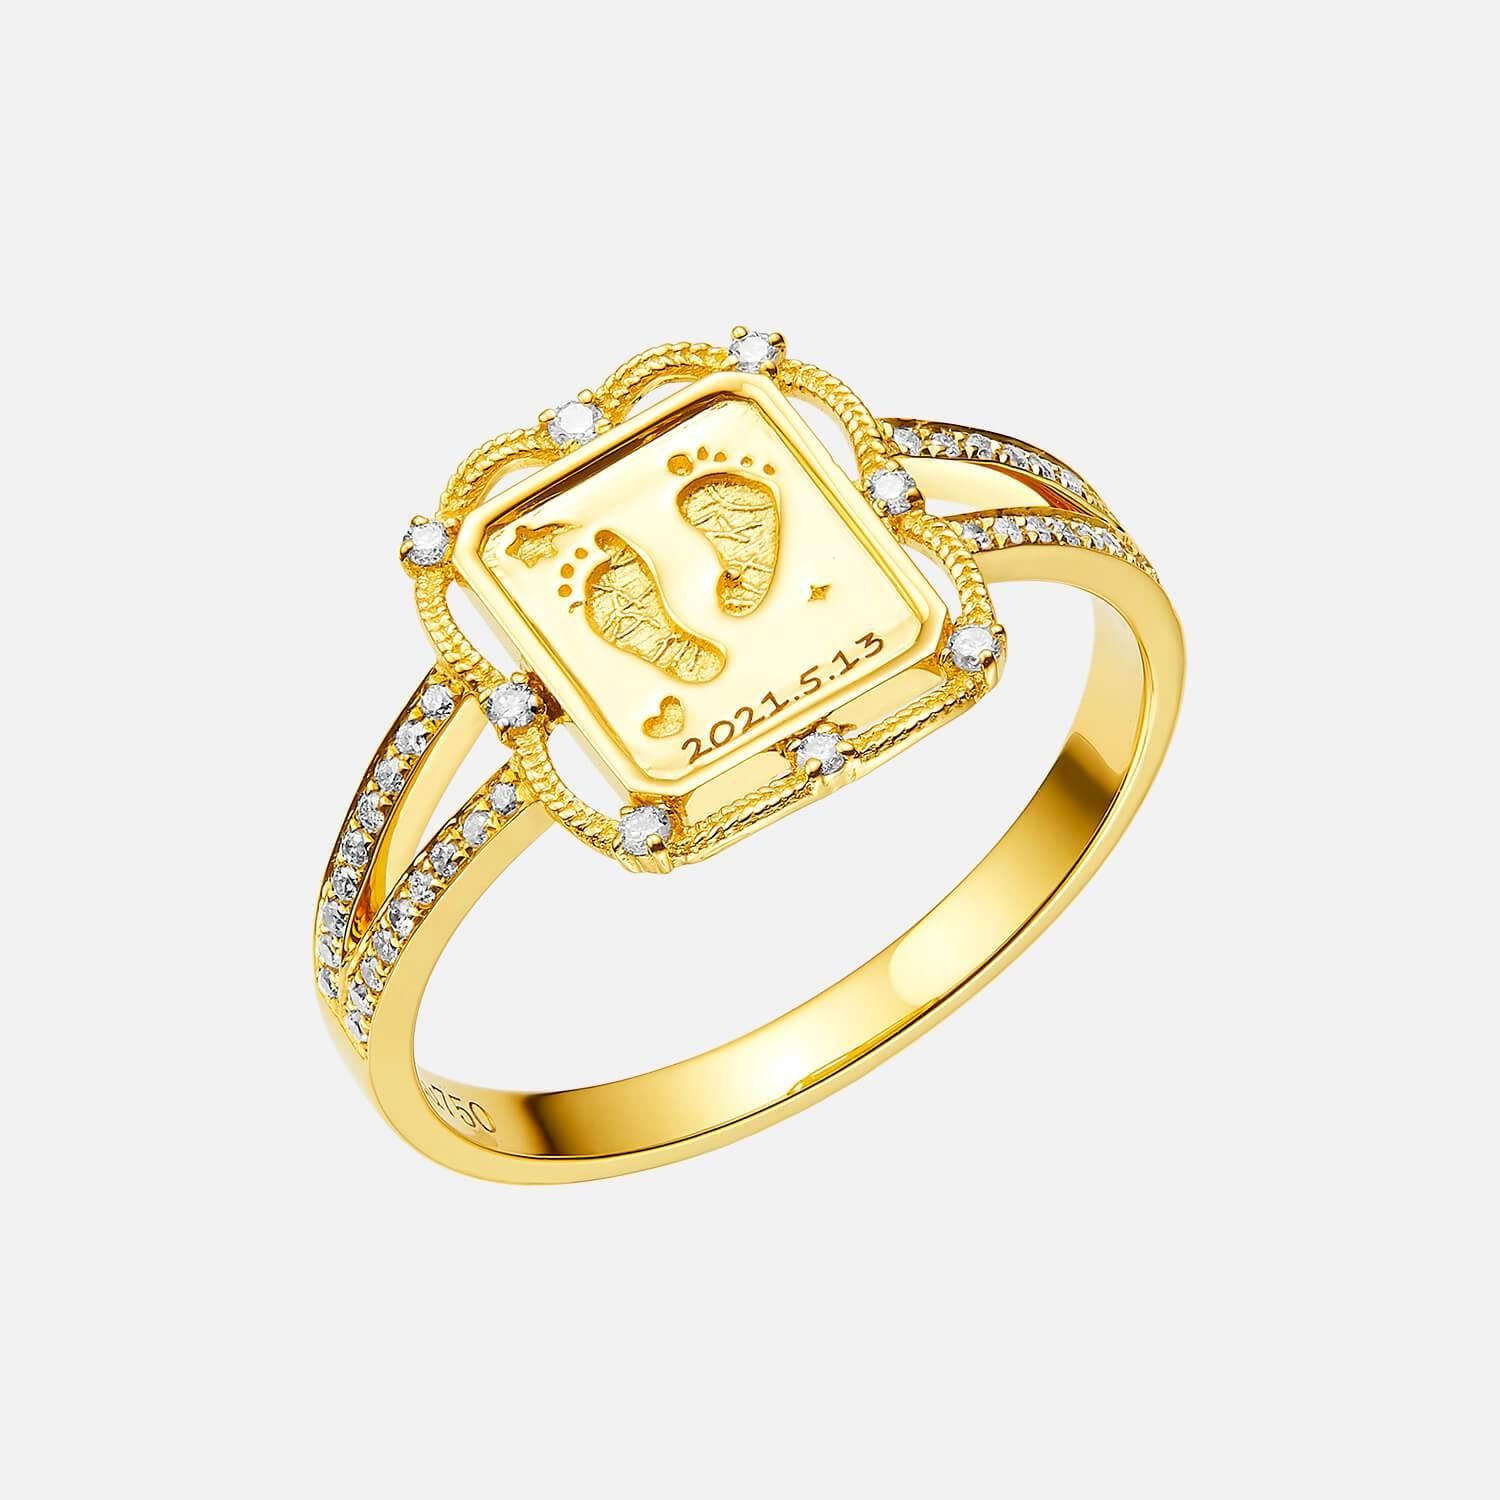 Baby Boy 22K Gold Ring - BjRi15989 - 22K Gold Ring for boys designed with  machine cuts in matte and shine finish combination.